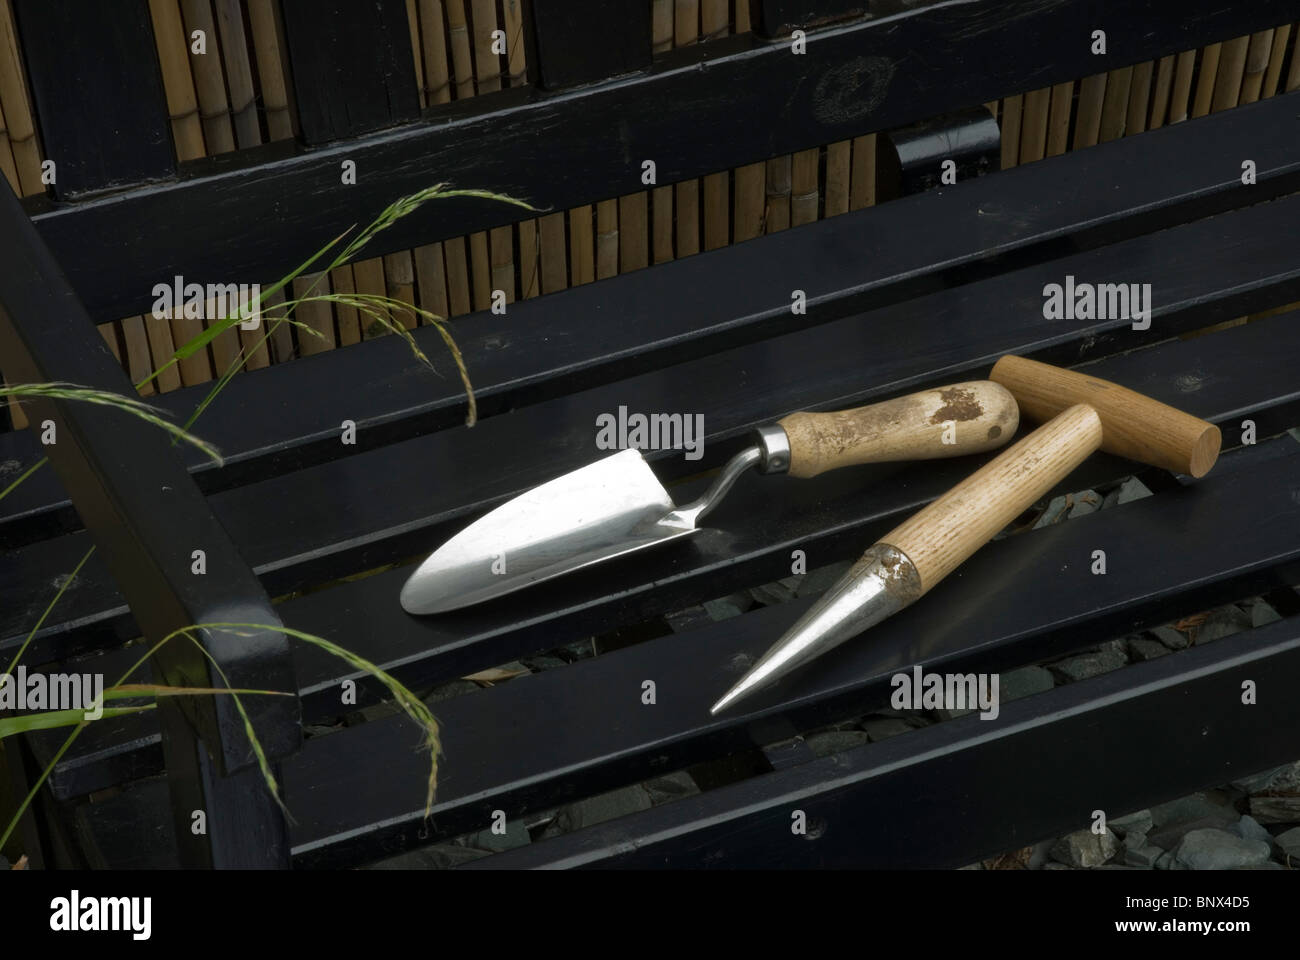 Hand trowel and dibber on a garden seat Stock Photo